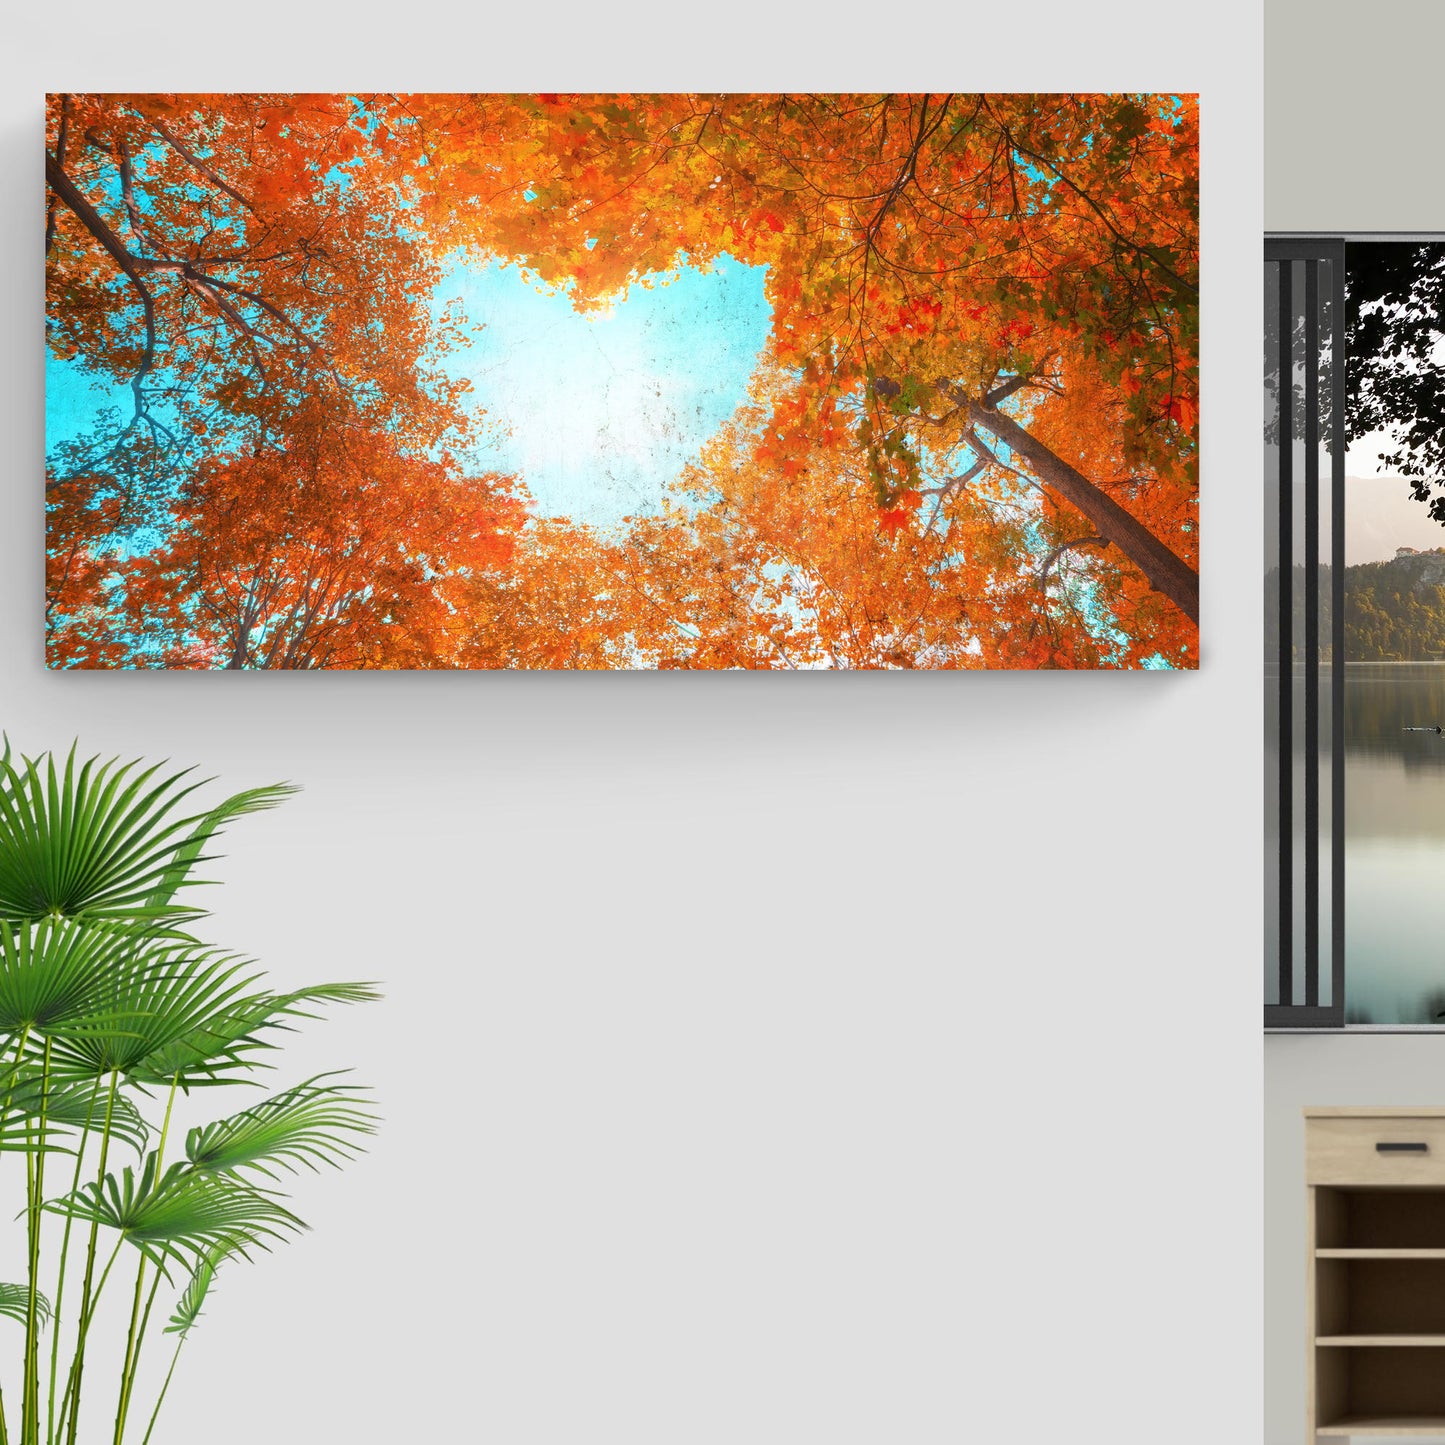 Under The Autumn Sunset Canvas Wall Art - Image by Tailored Canvases